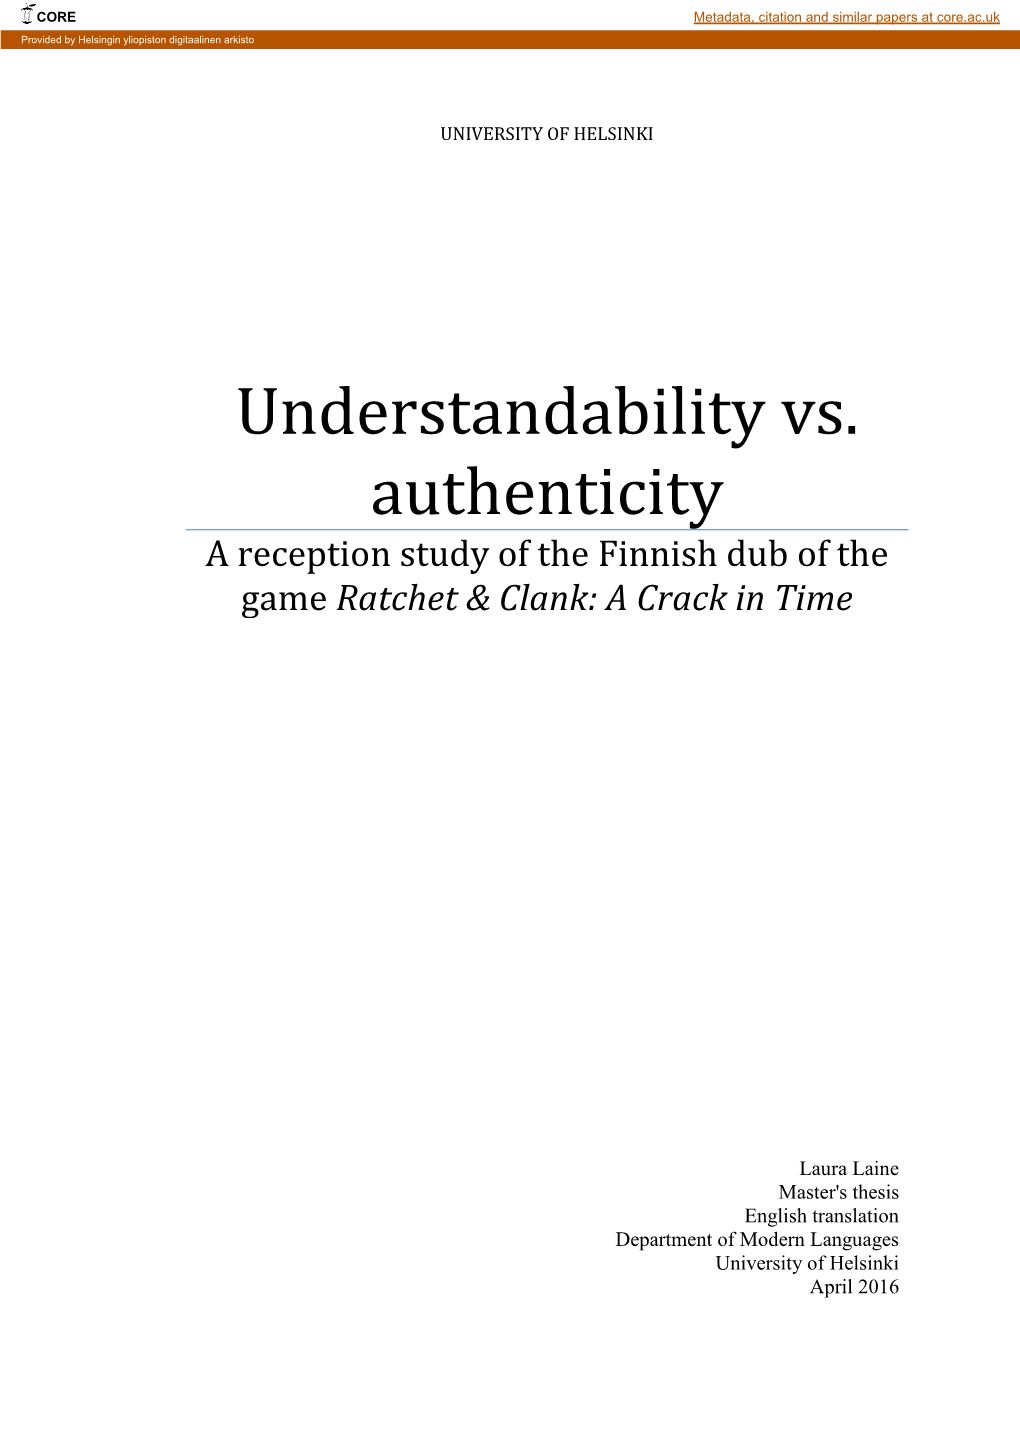 Understandability Vs. Authenticity a Reception Study of the Finnish Dub of the Game Ratchet & Clank: a Crack in Time